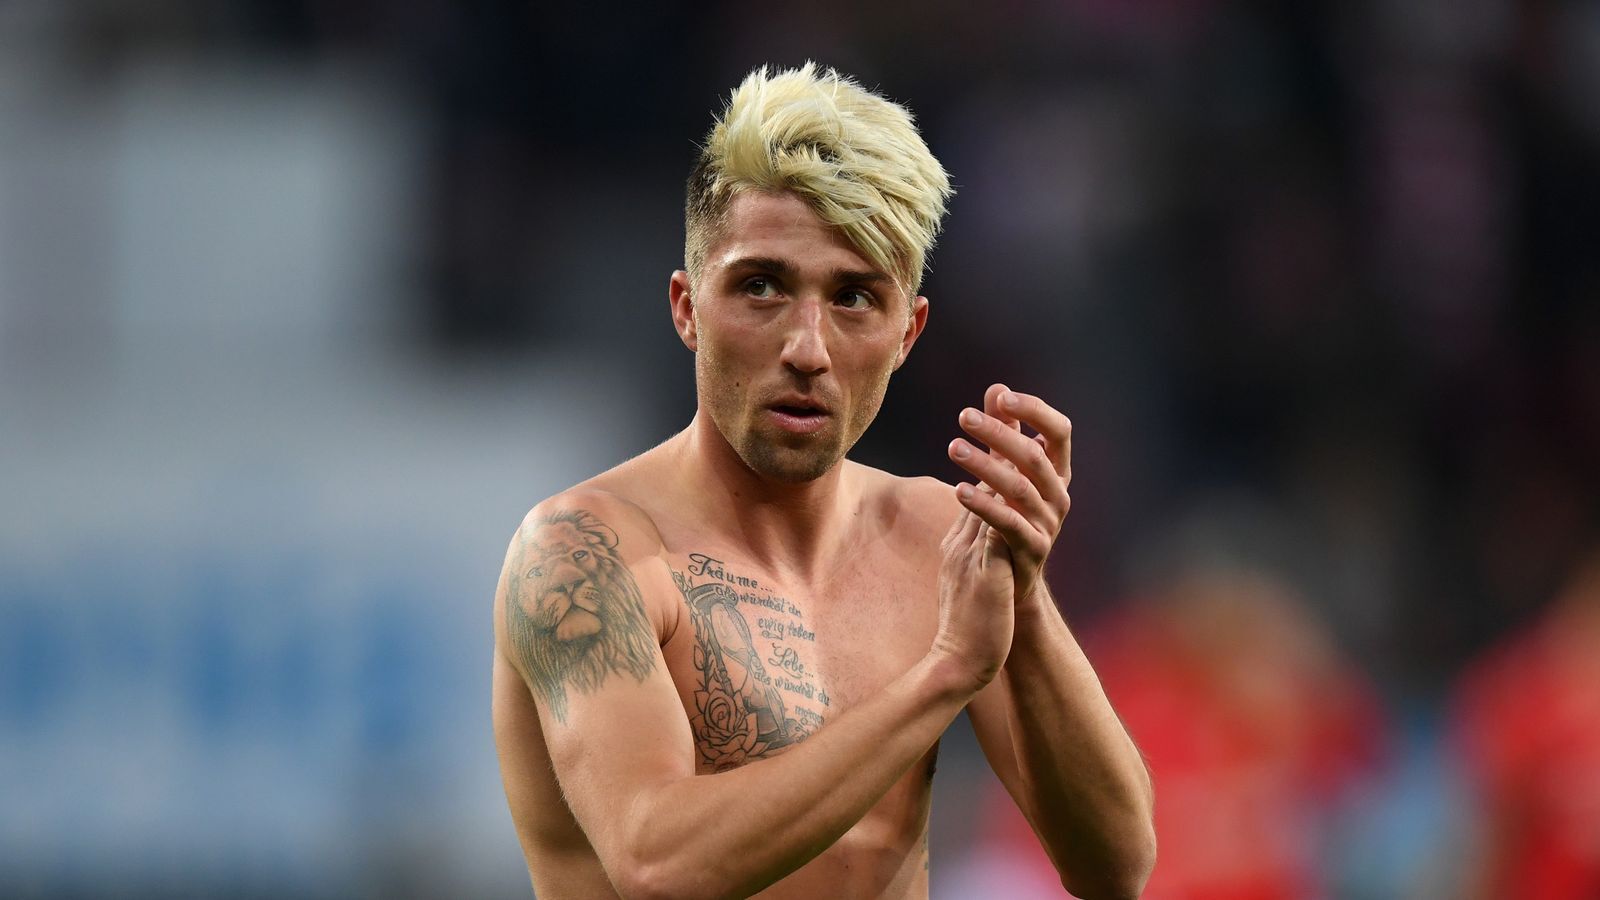 Midfielder Kevin Kampl to stay at RB Leipzig until 2023